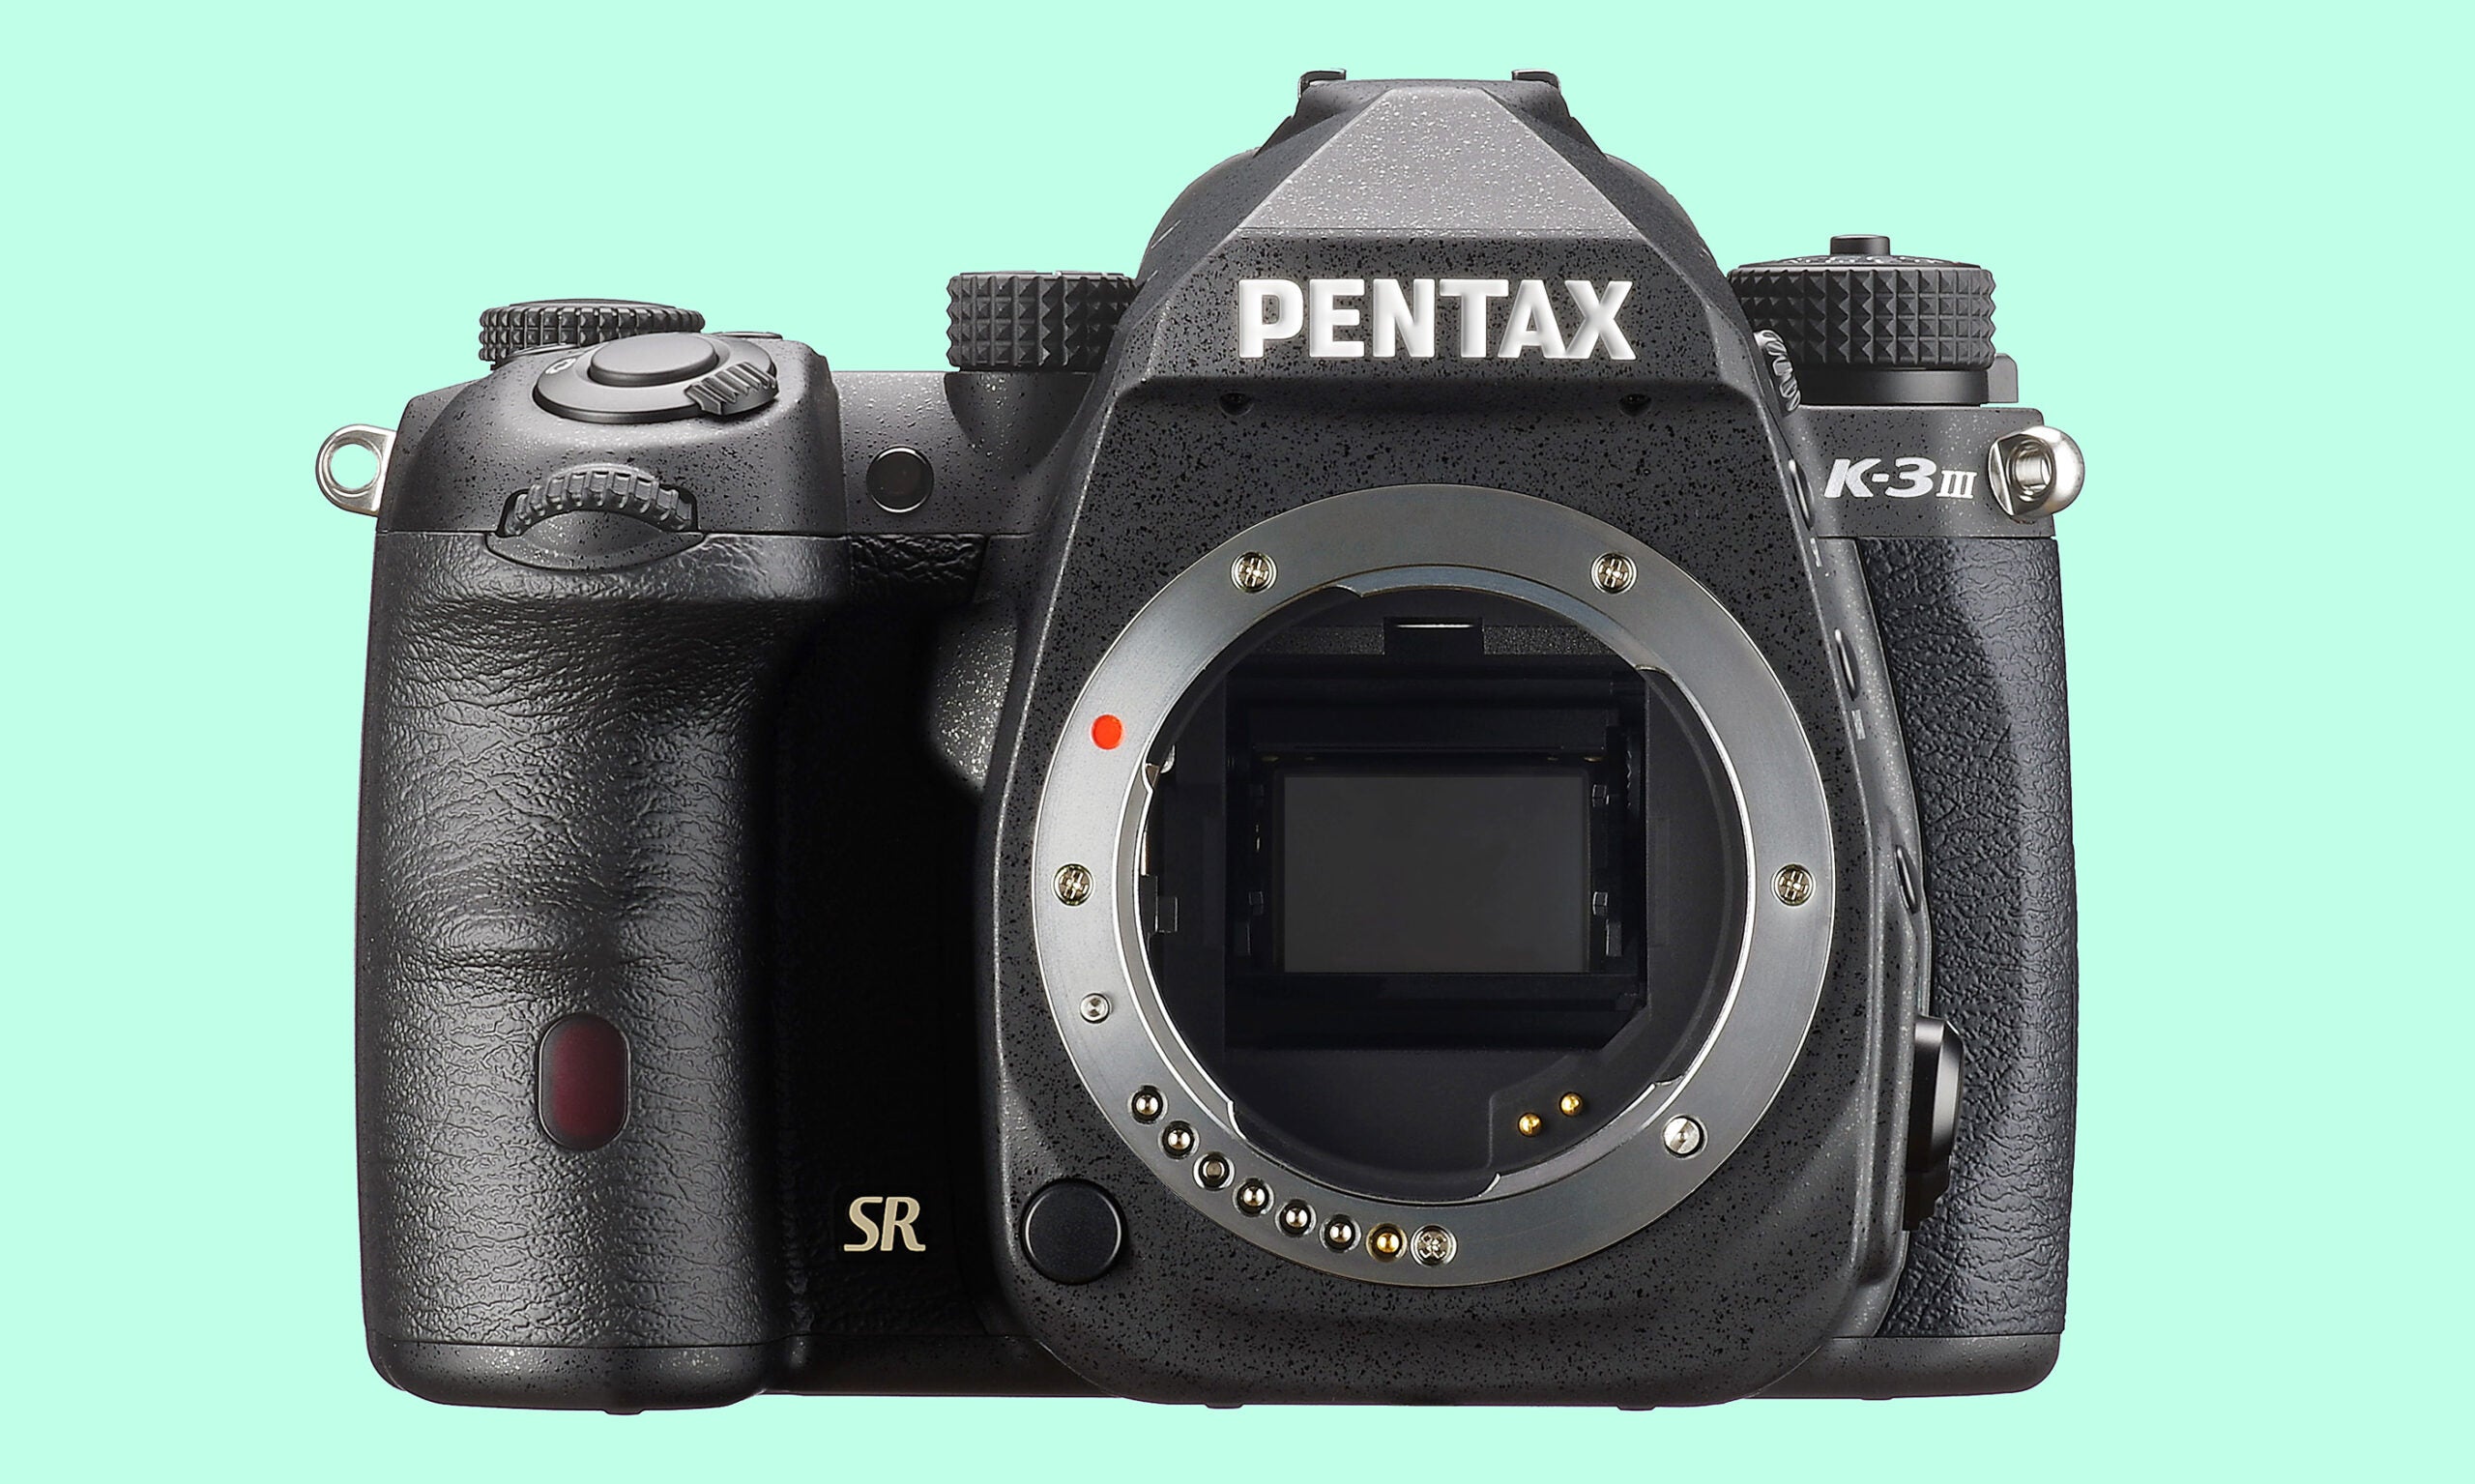 The Pentax K3 Mark III is the only DSLR released in 2021.